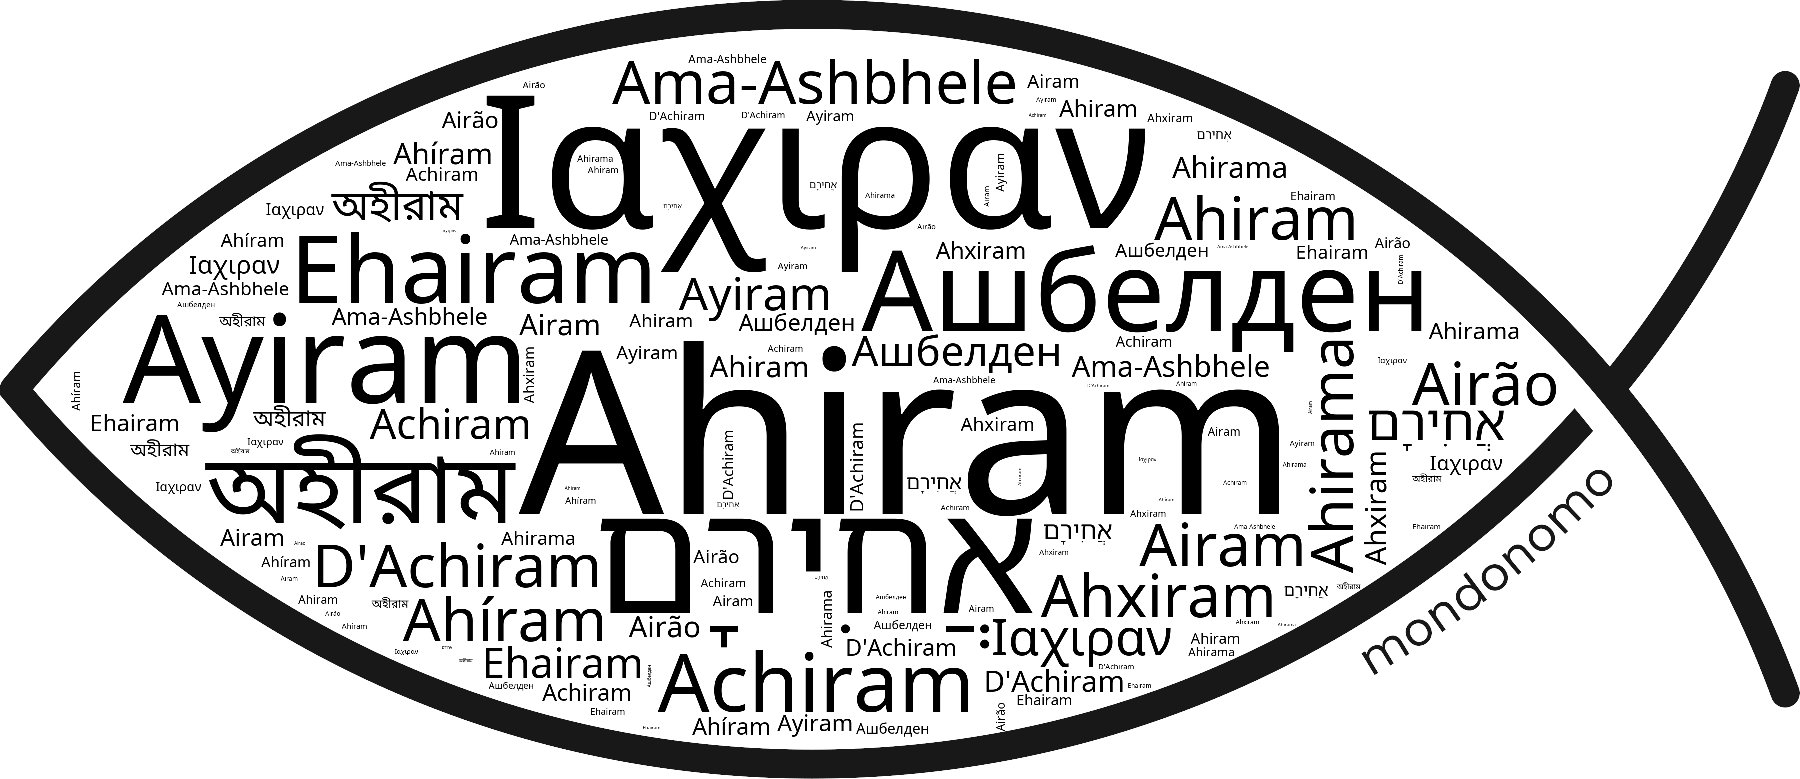 Name Ahiram in the world's Bibles